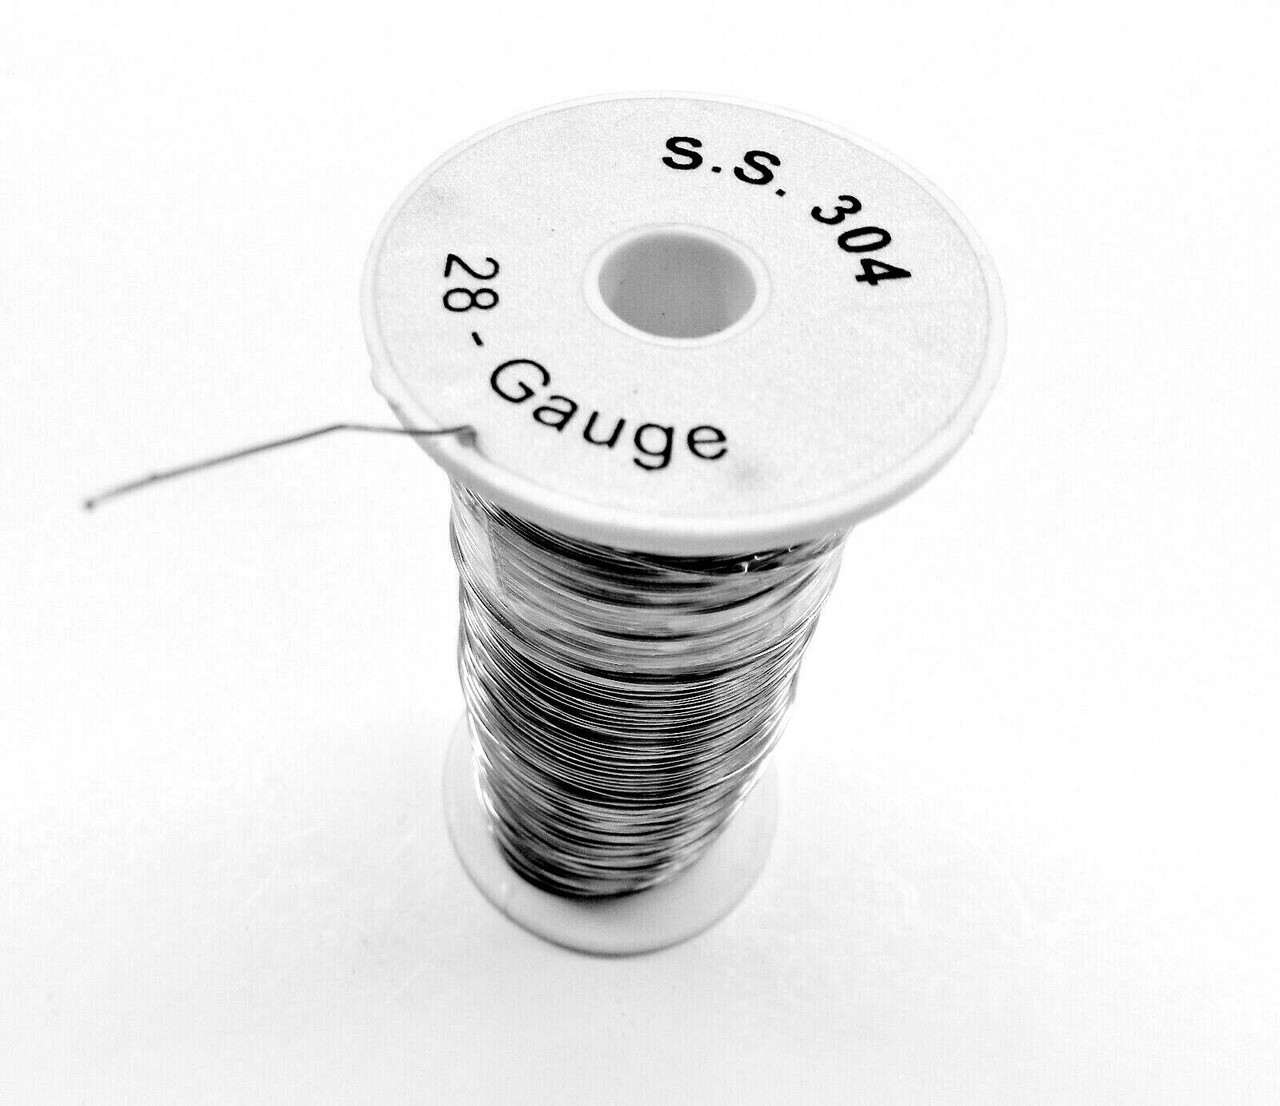 28ga Stainless Steel Wire Dead Soft Binding Wire Soldering 1/2lb Jewelry Making